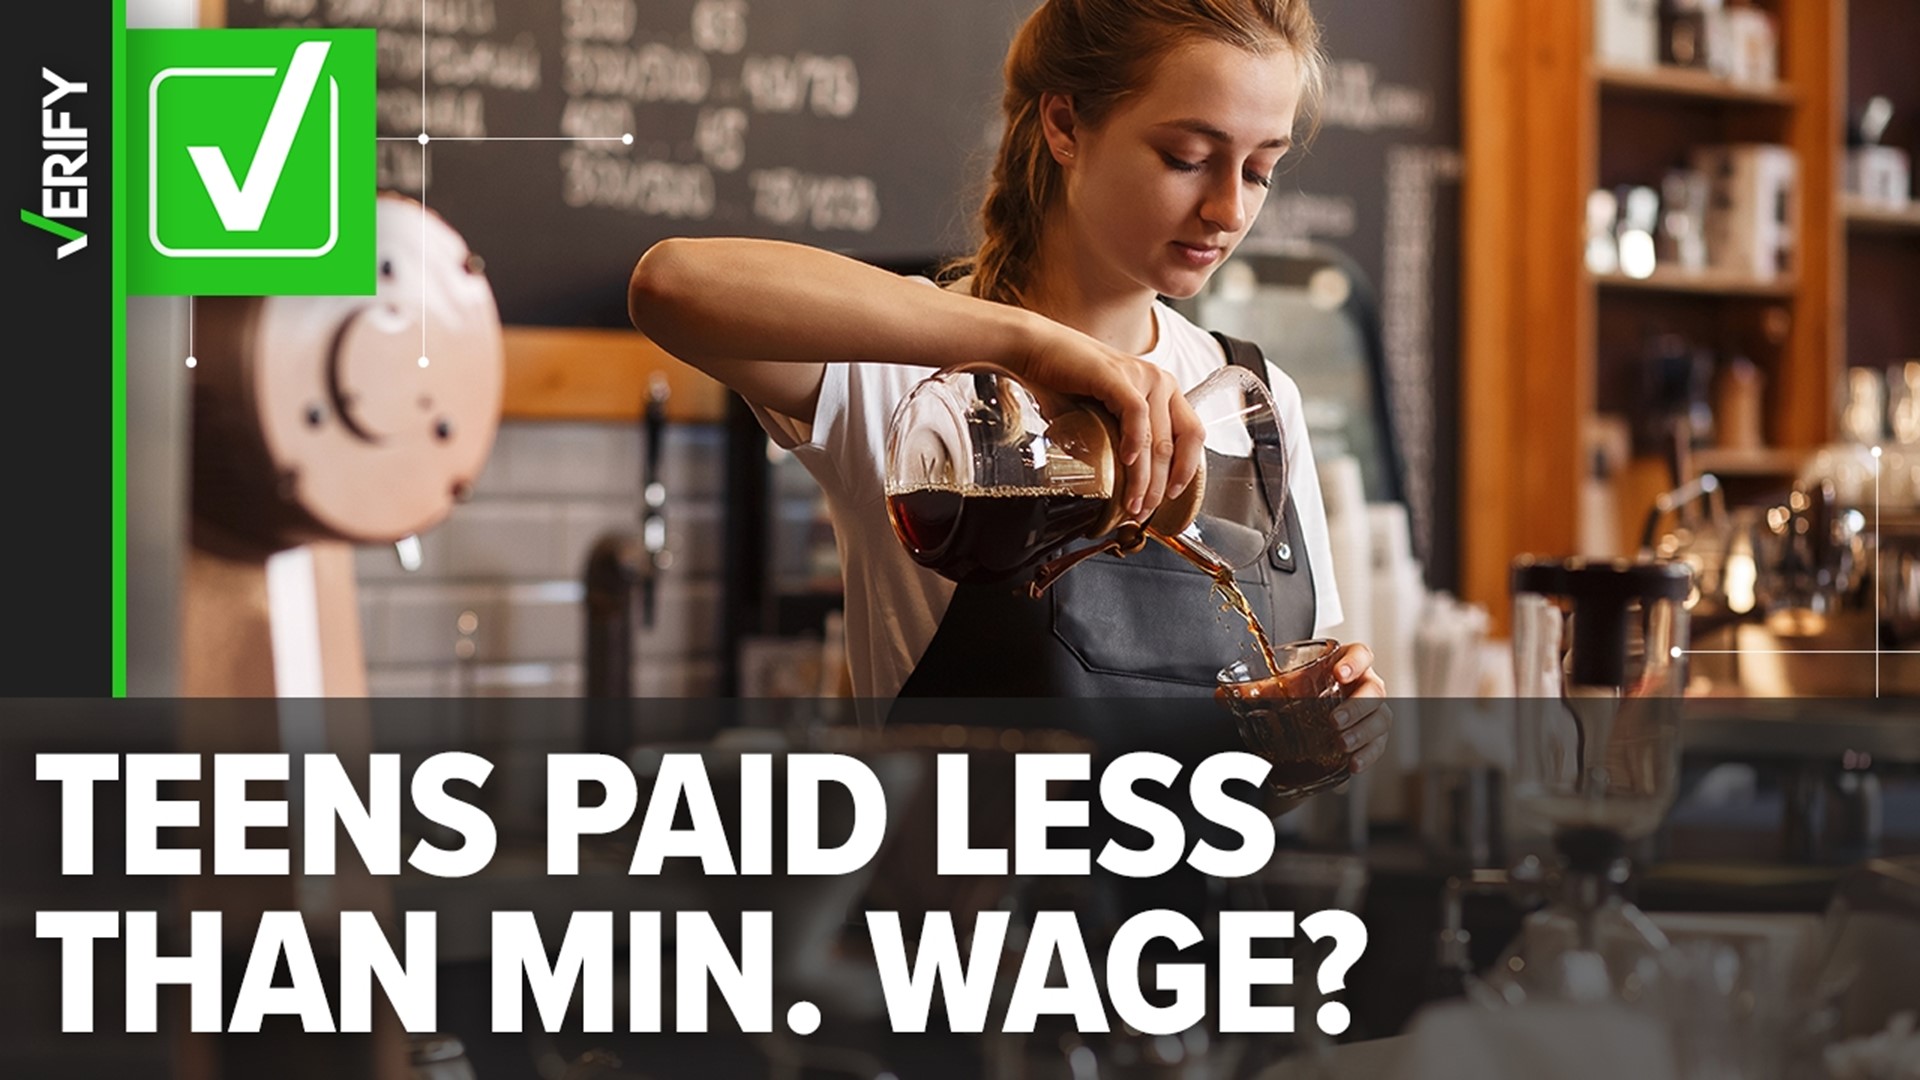 Under federal law, employers are allowed to pay workers under the age of 20 less than the federal minimum wage during the first 90 days after initial employment.